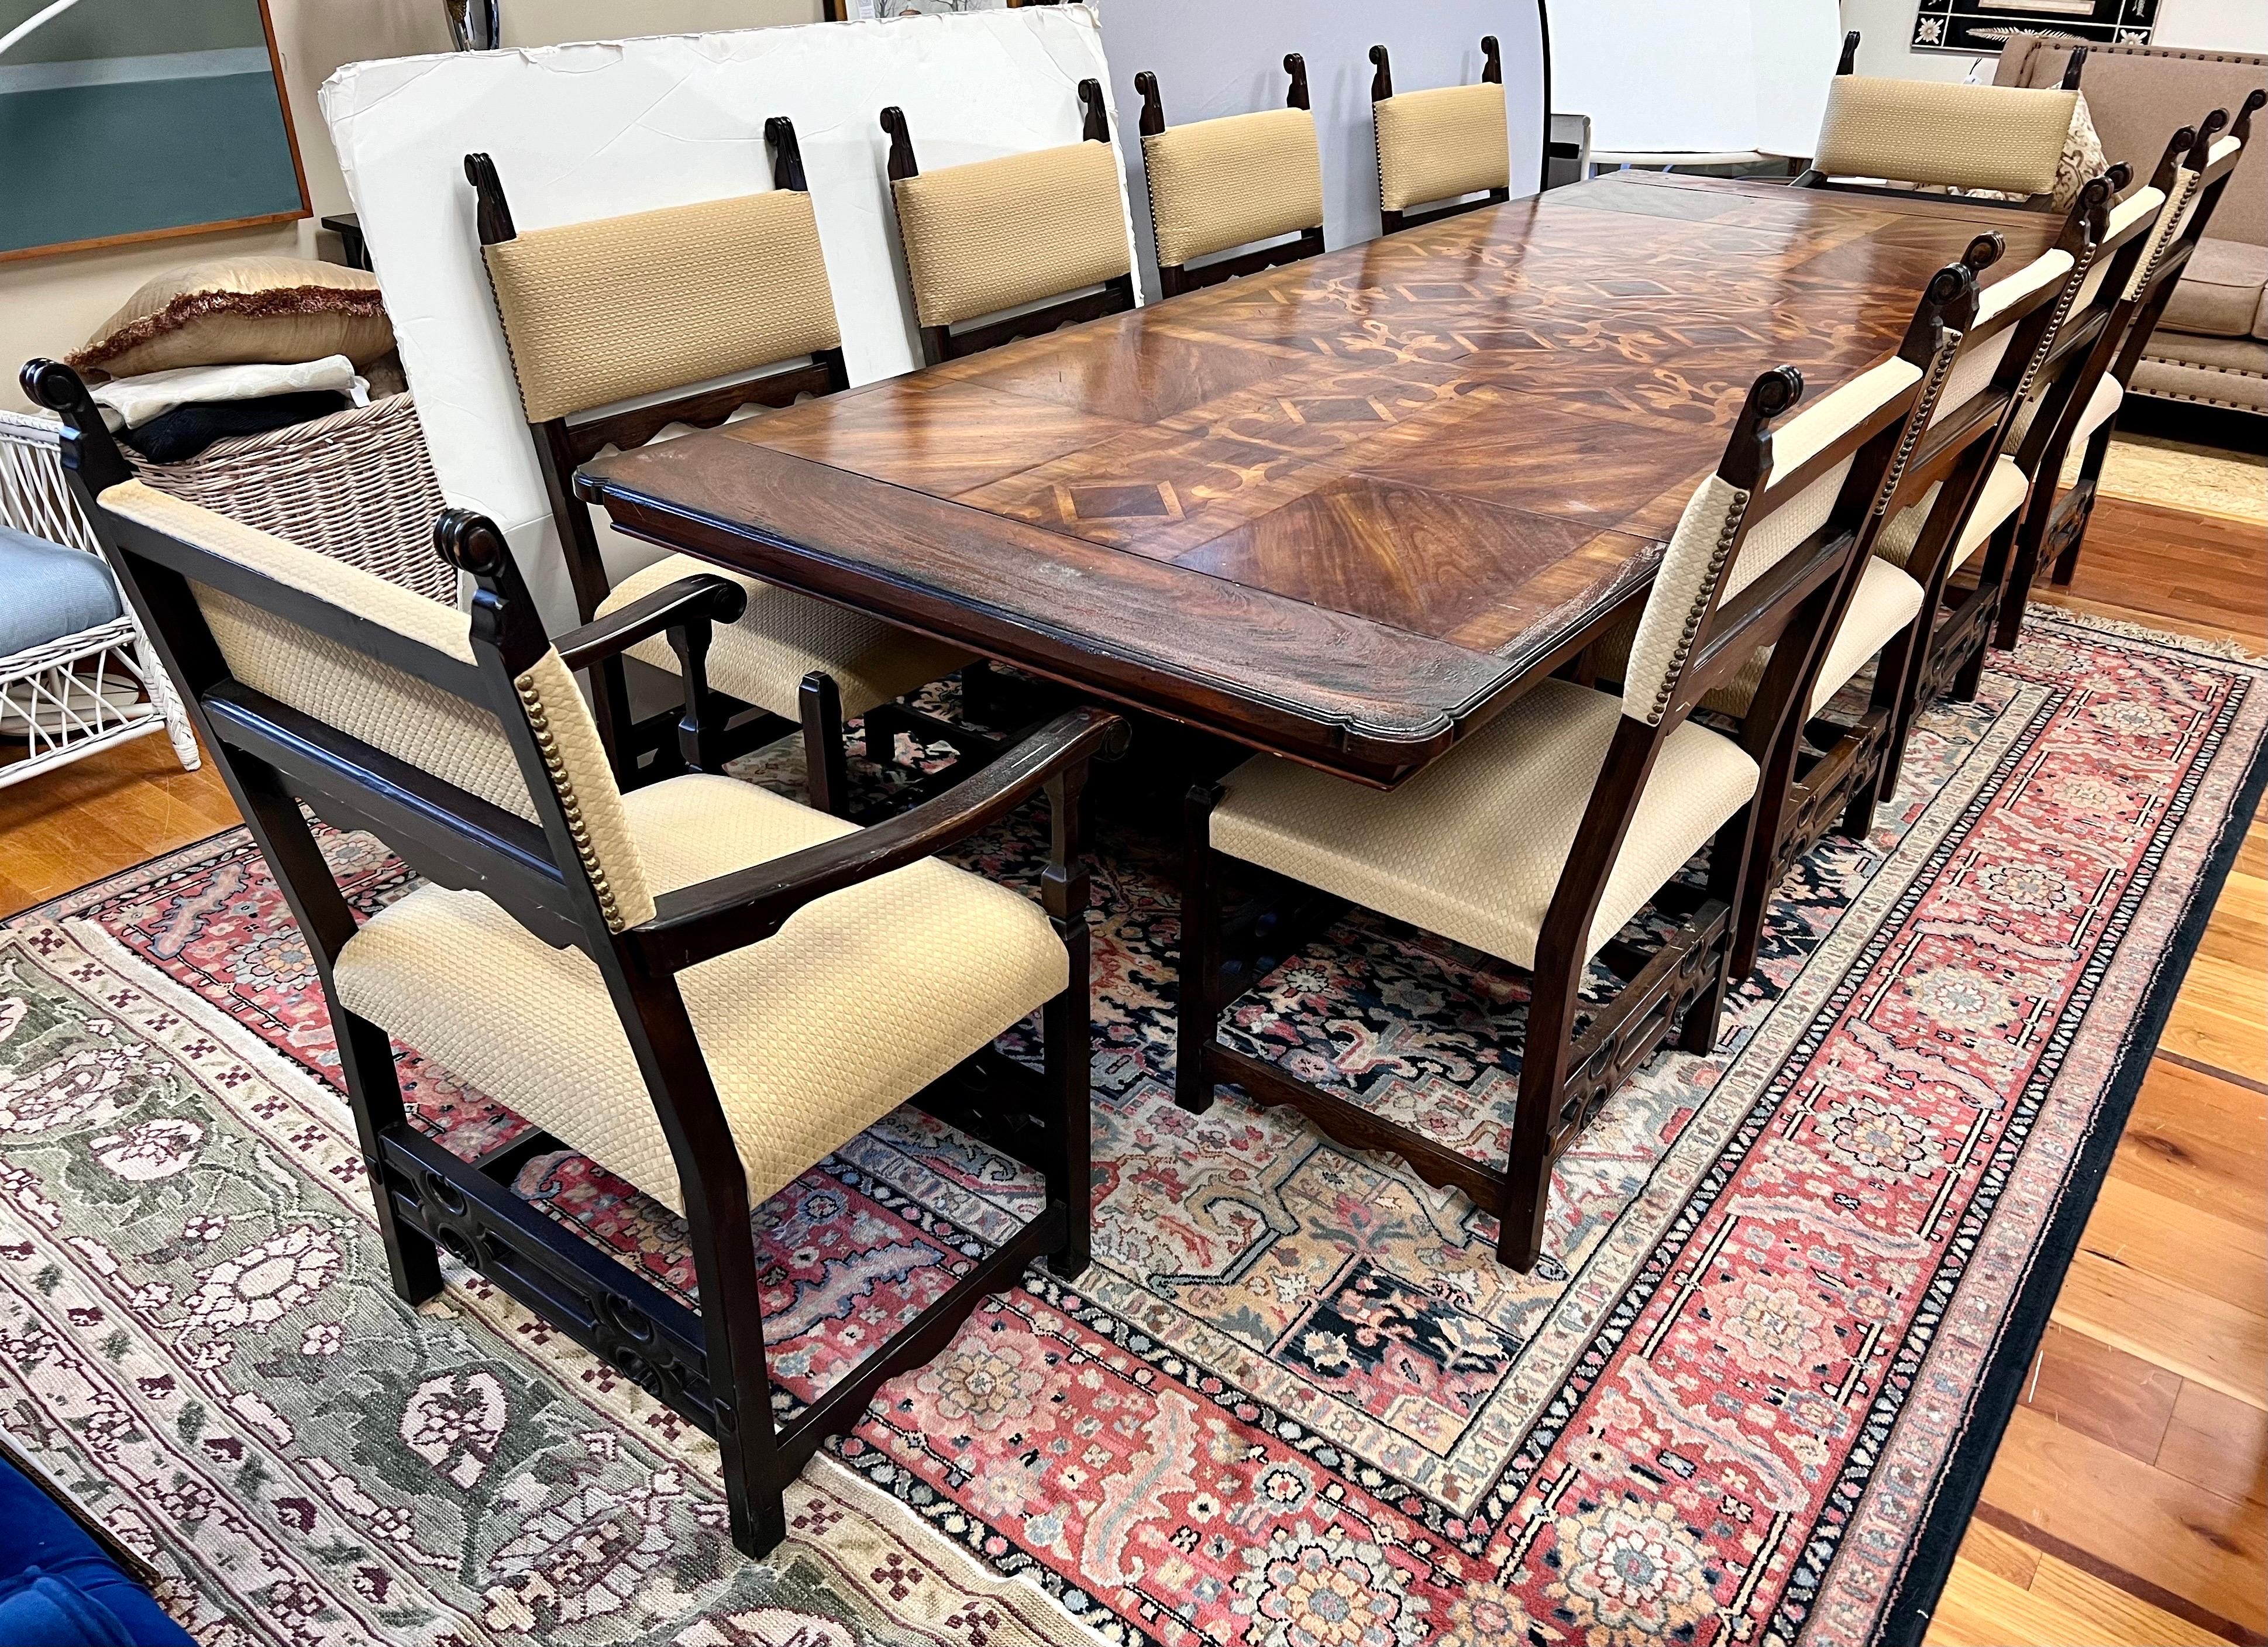 A spectacular dining set which includes a walnut trestle table with beautiful marquetry pattern at top, see pics - really one of a kind.  Table expands when the two leaves are included which slide in at each end versus the middle.  There are 10